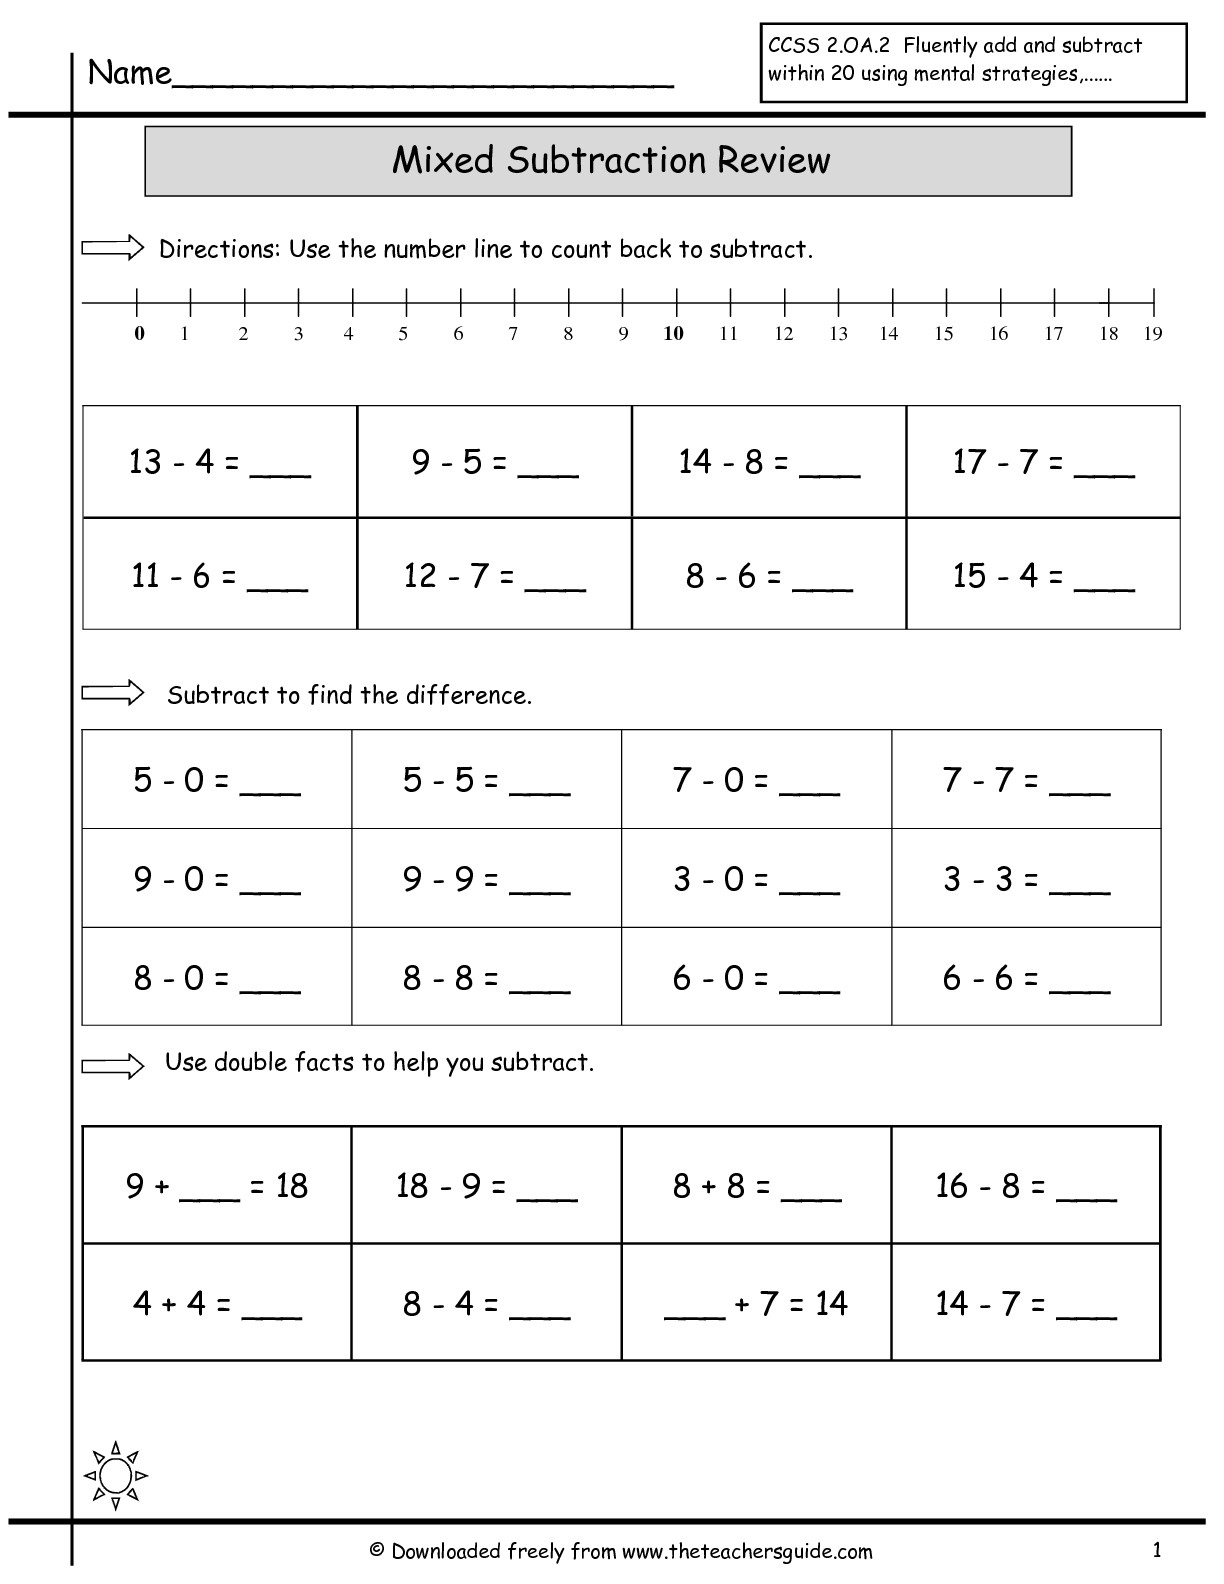 Mixed Addition and Subtraction Worksheets Image